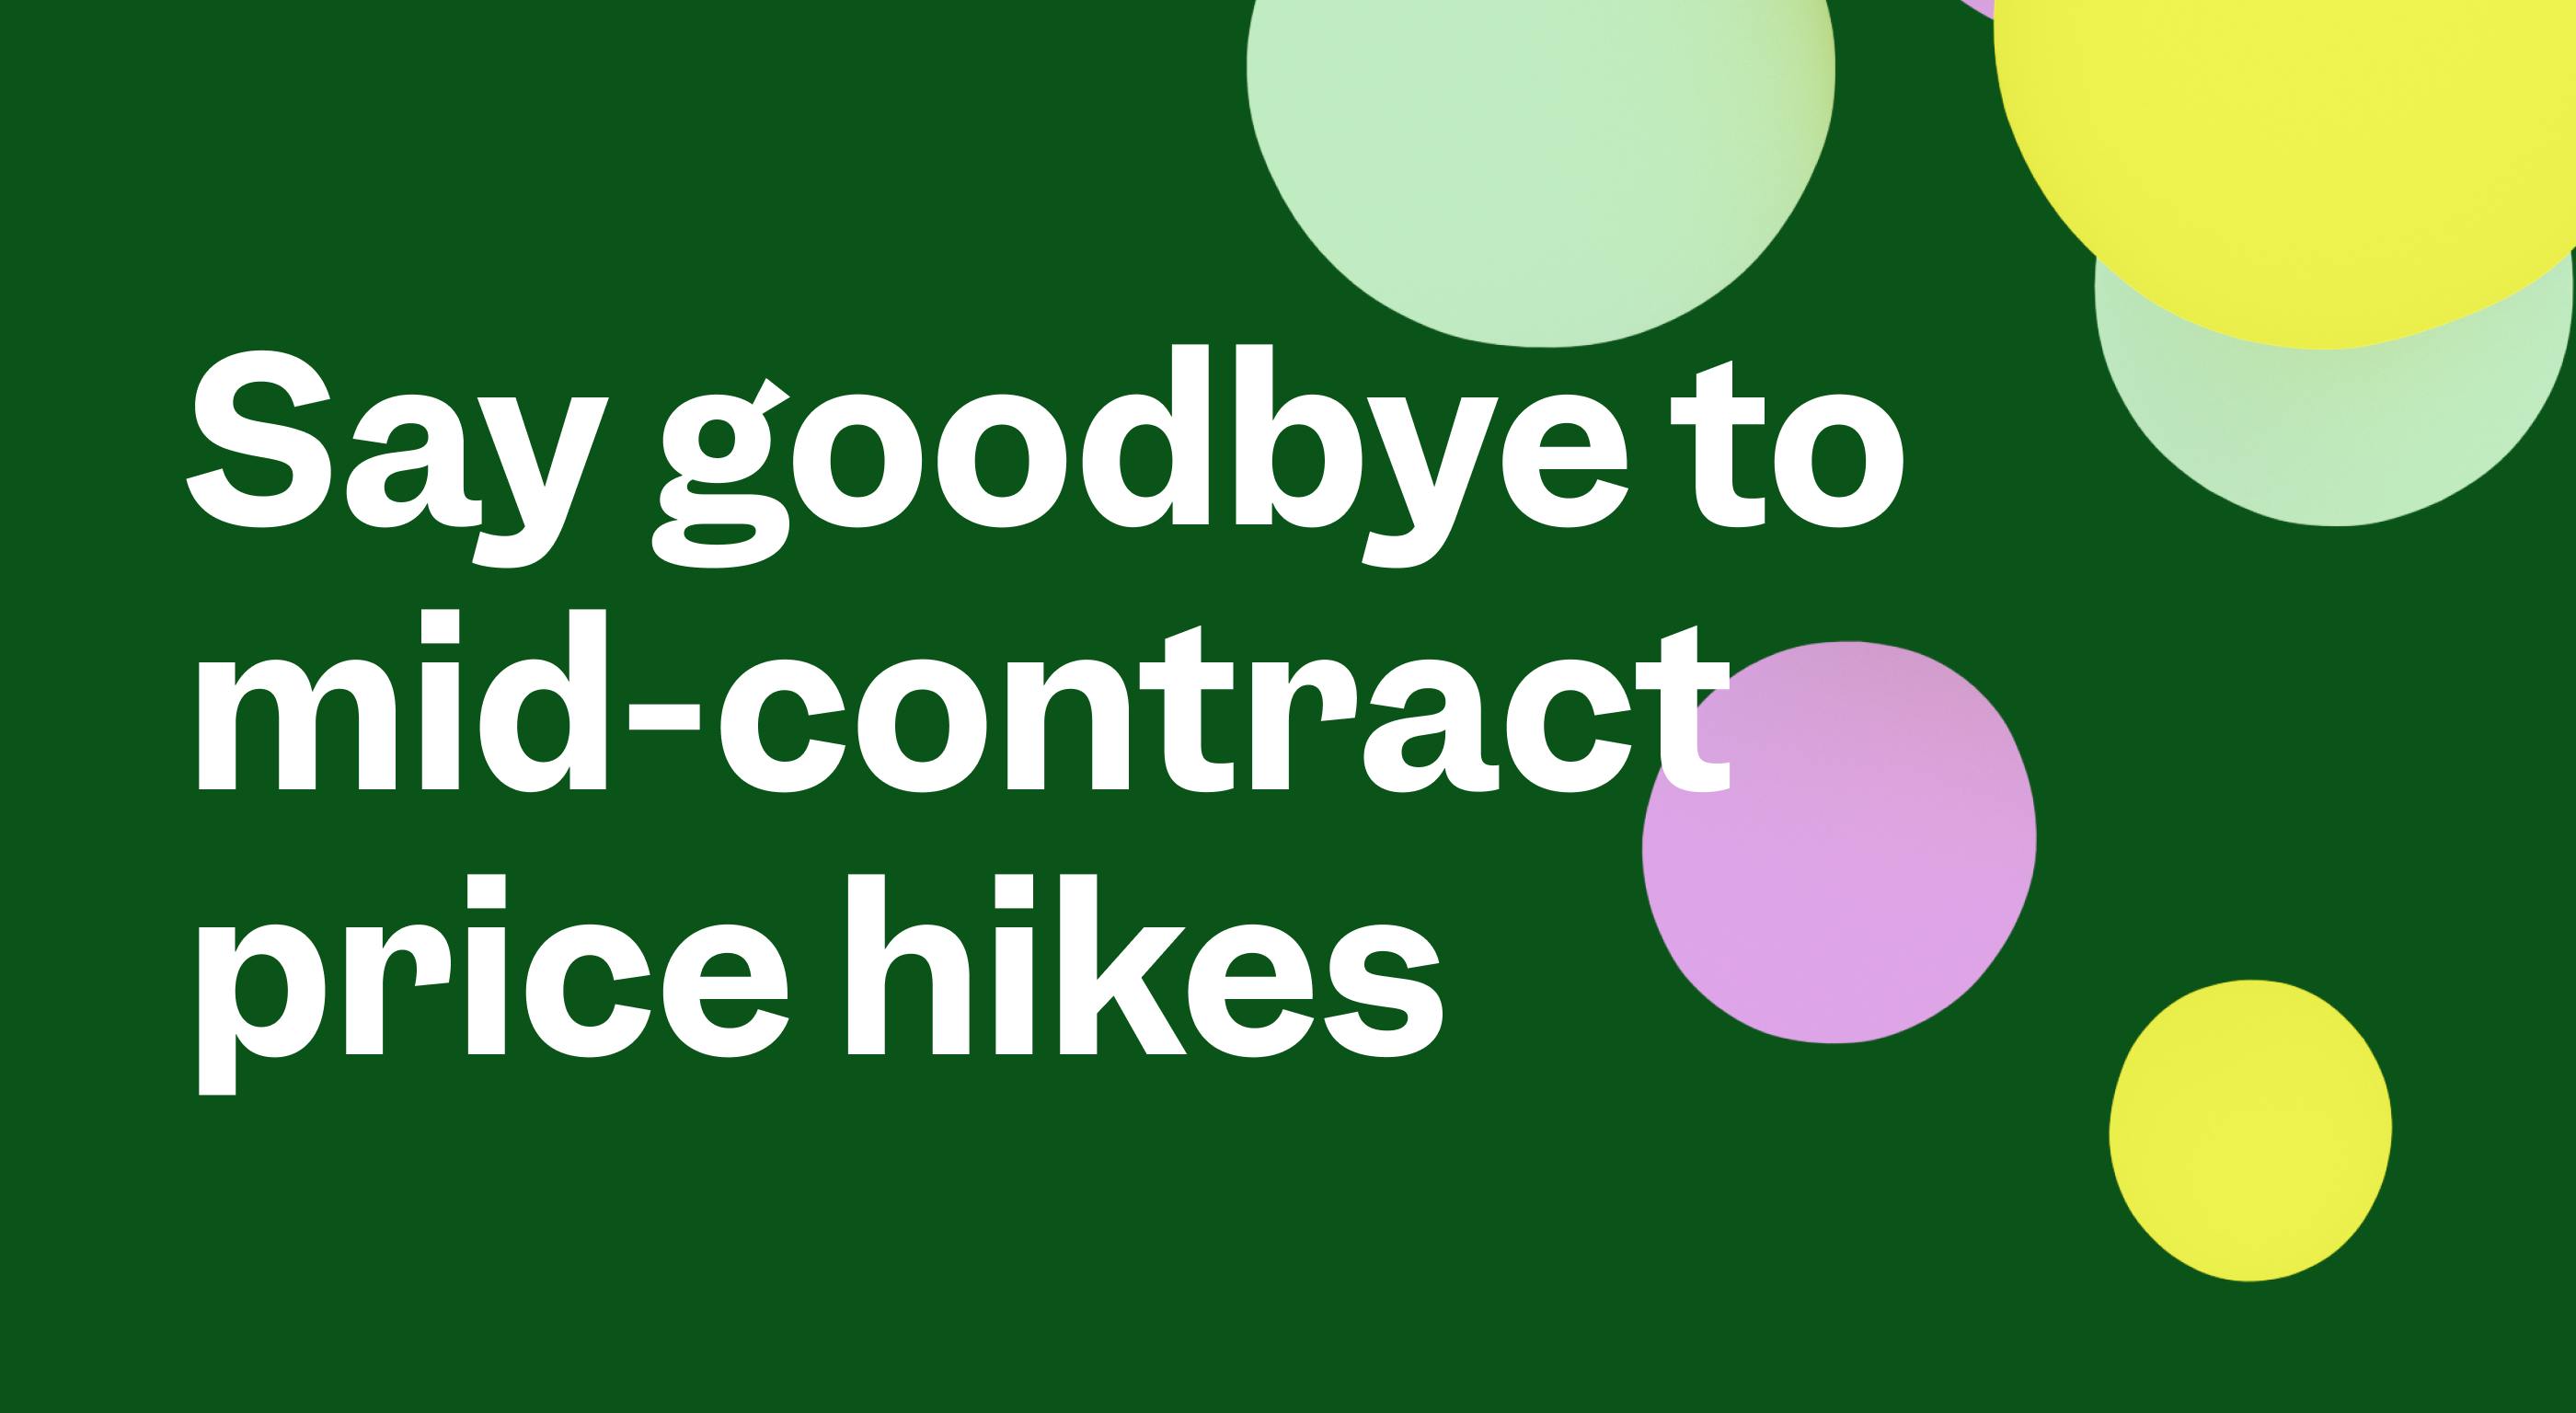 Say goodbye to mid-contract price hikes